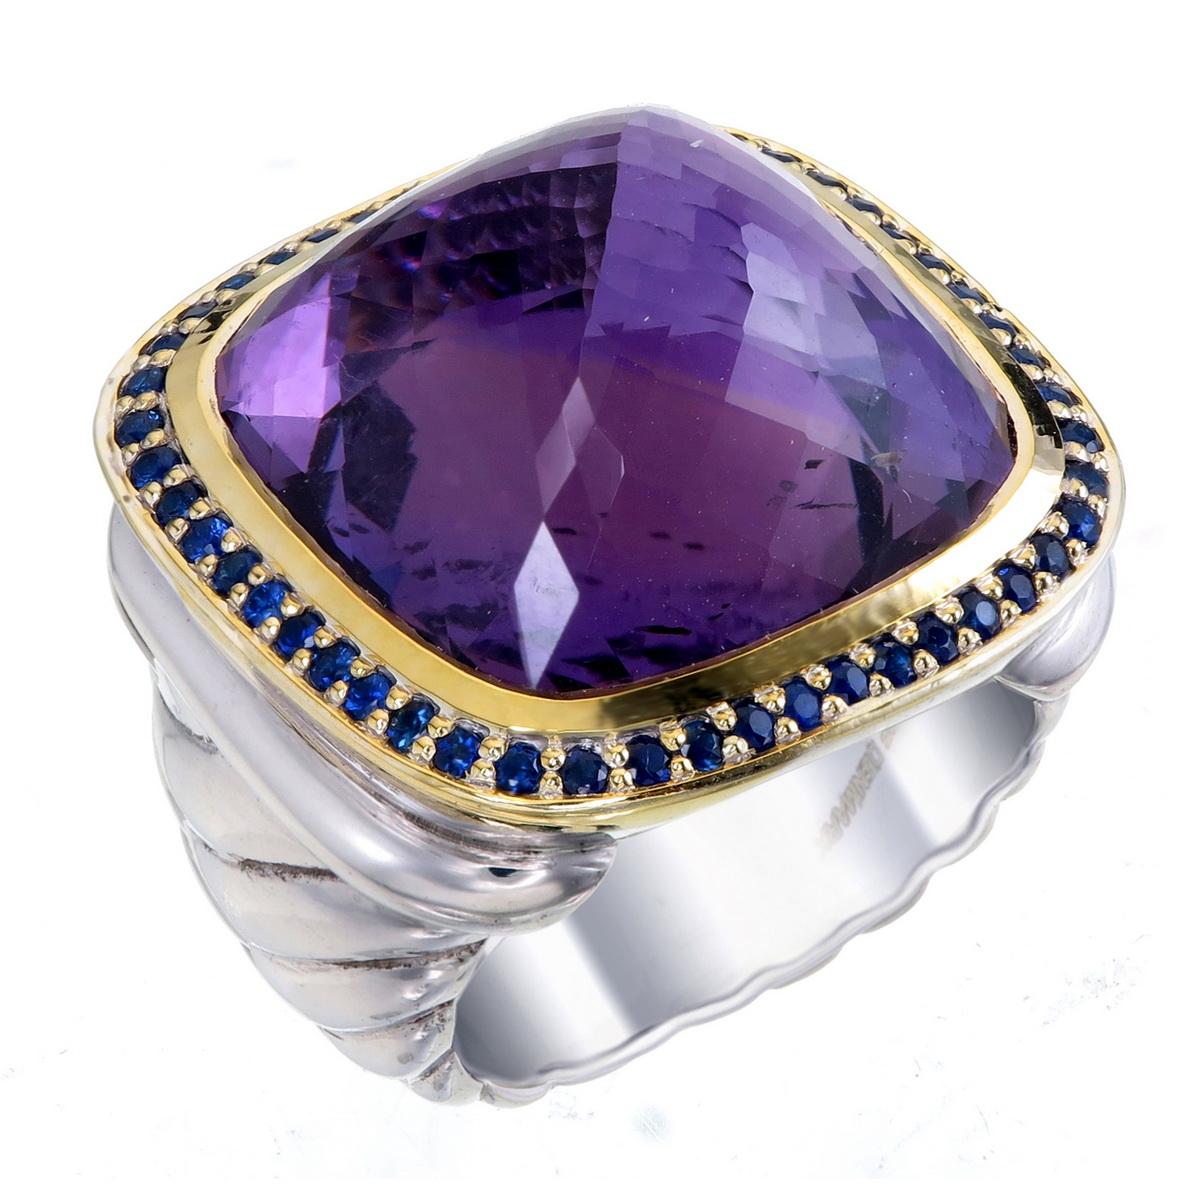 Orloff of Denmark; Sterling Silver Statement ring featuring a total of 0.50 carats of Blue Sapphires surrounding a huge Amethyst, set in an 18 Karat Gold-Plated bezel

Introducing a striking statement ring crafted in 925 silver with an opulent 18